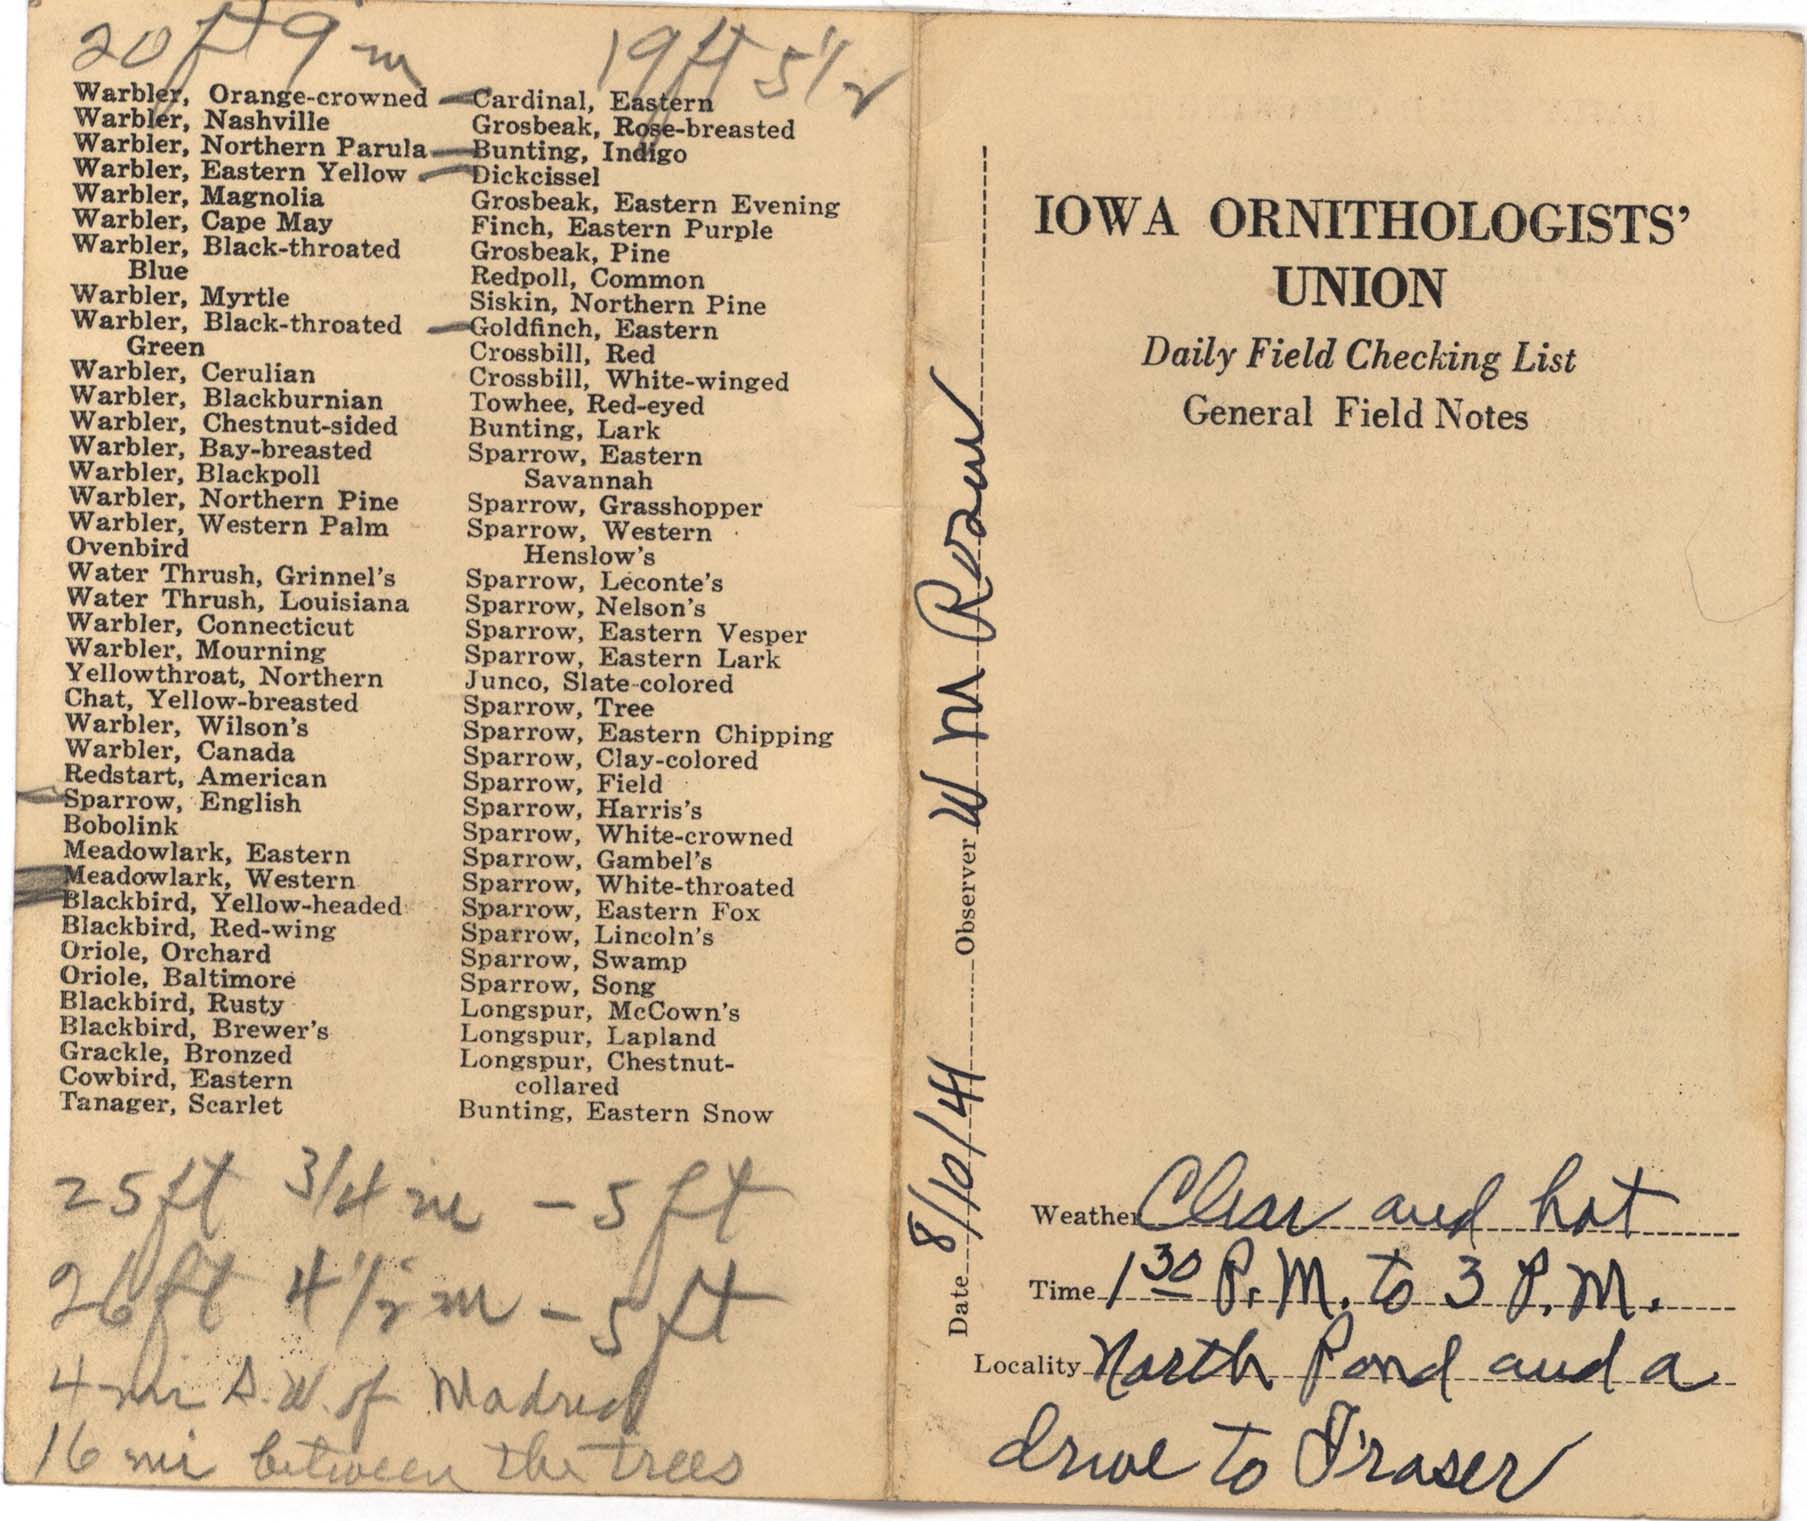 Daily field checking list by Walter Rosene, August 10, 1941